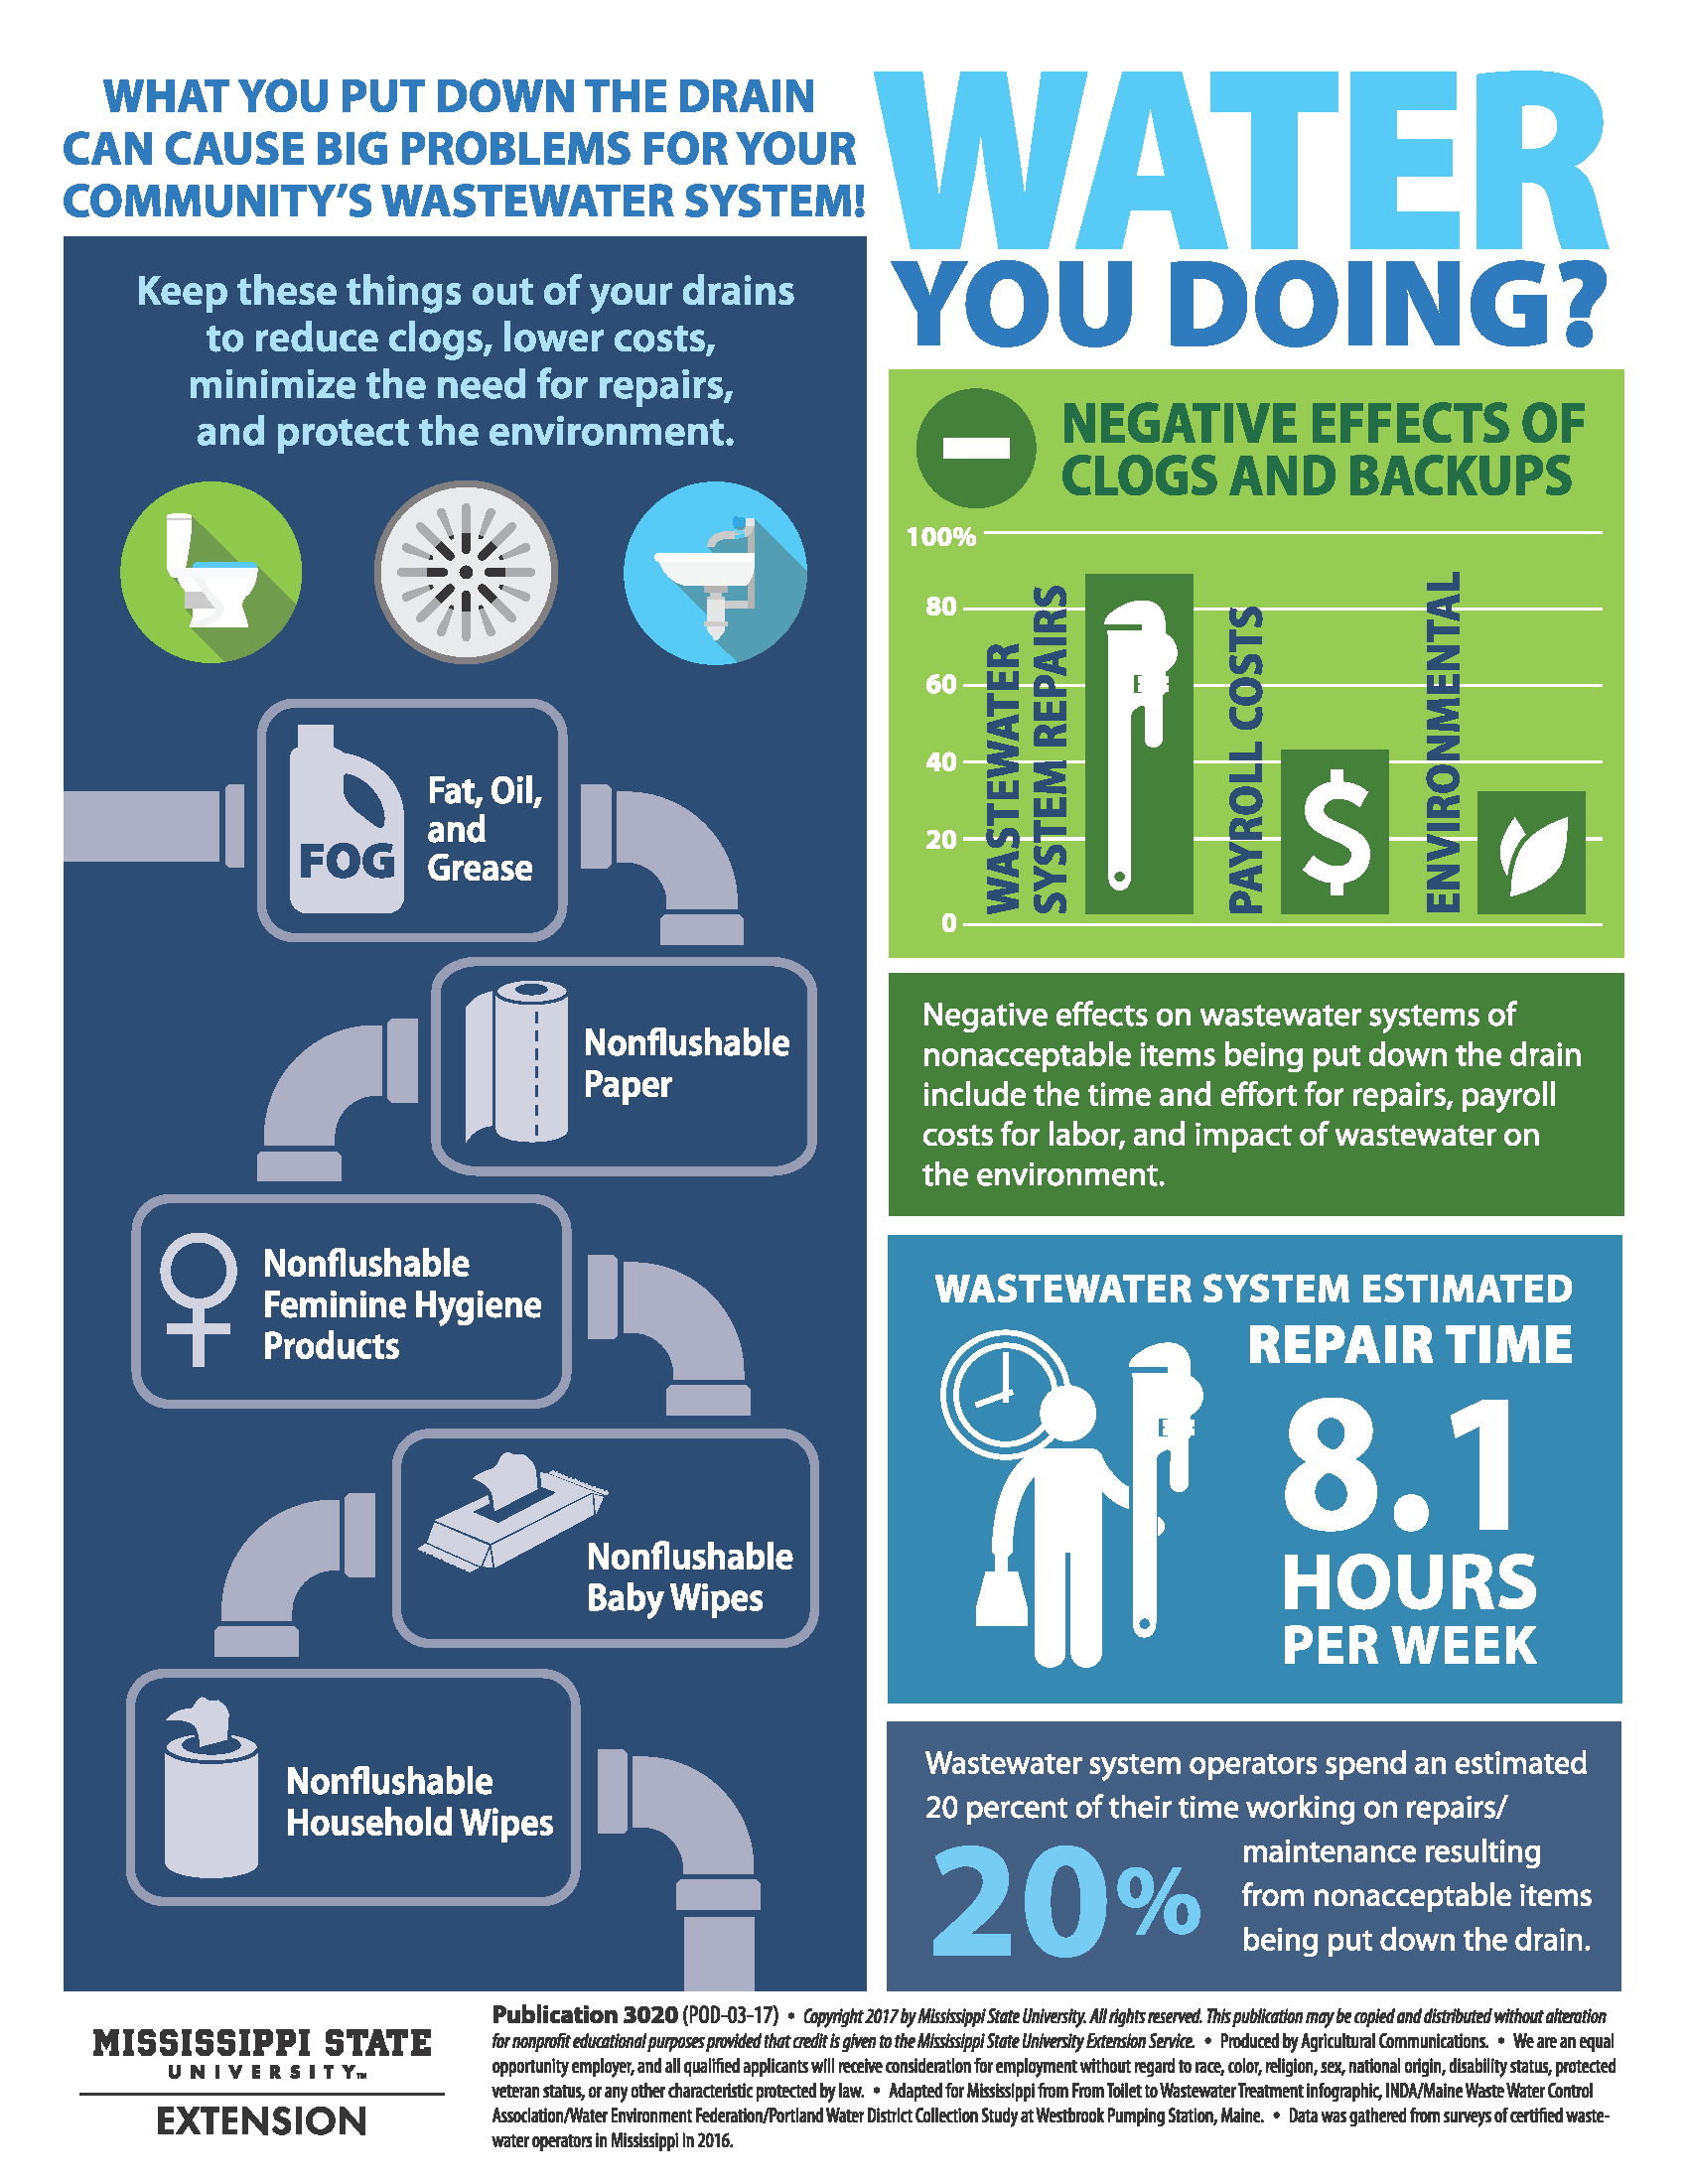 This is a wastewater infographic.